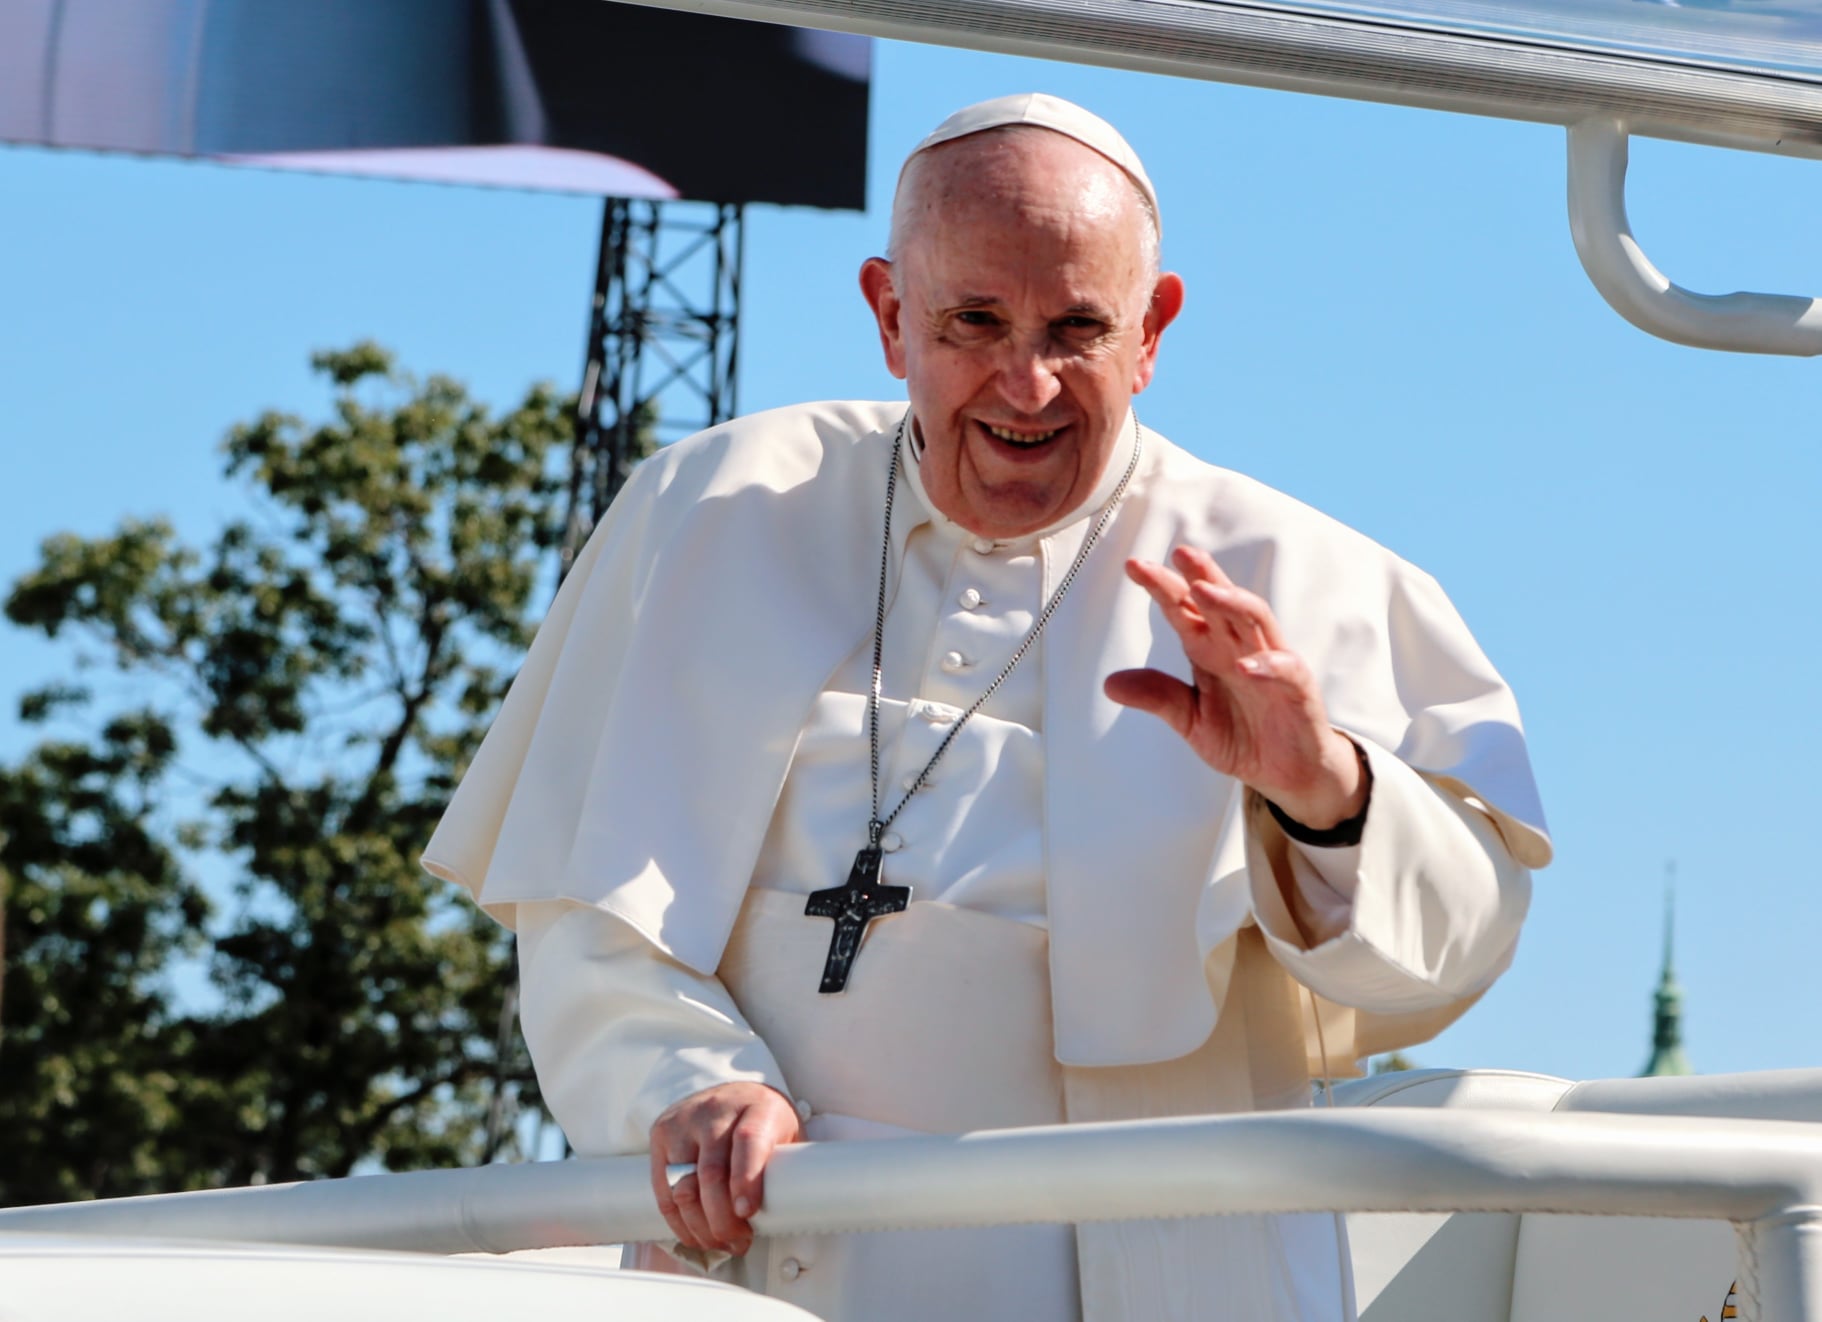 Francis in Budapest - The best photos of the Pope's visit!